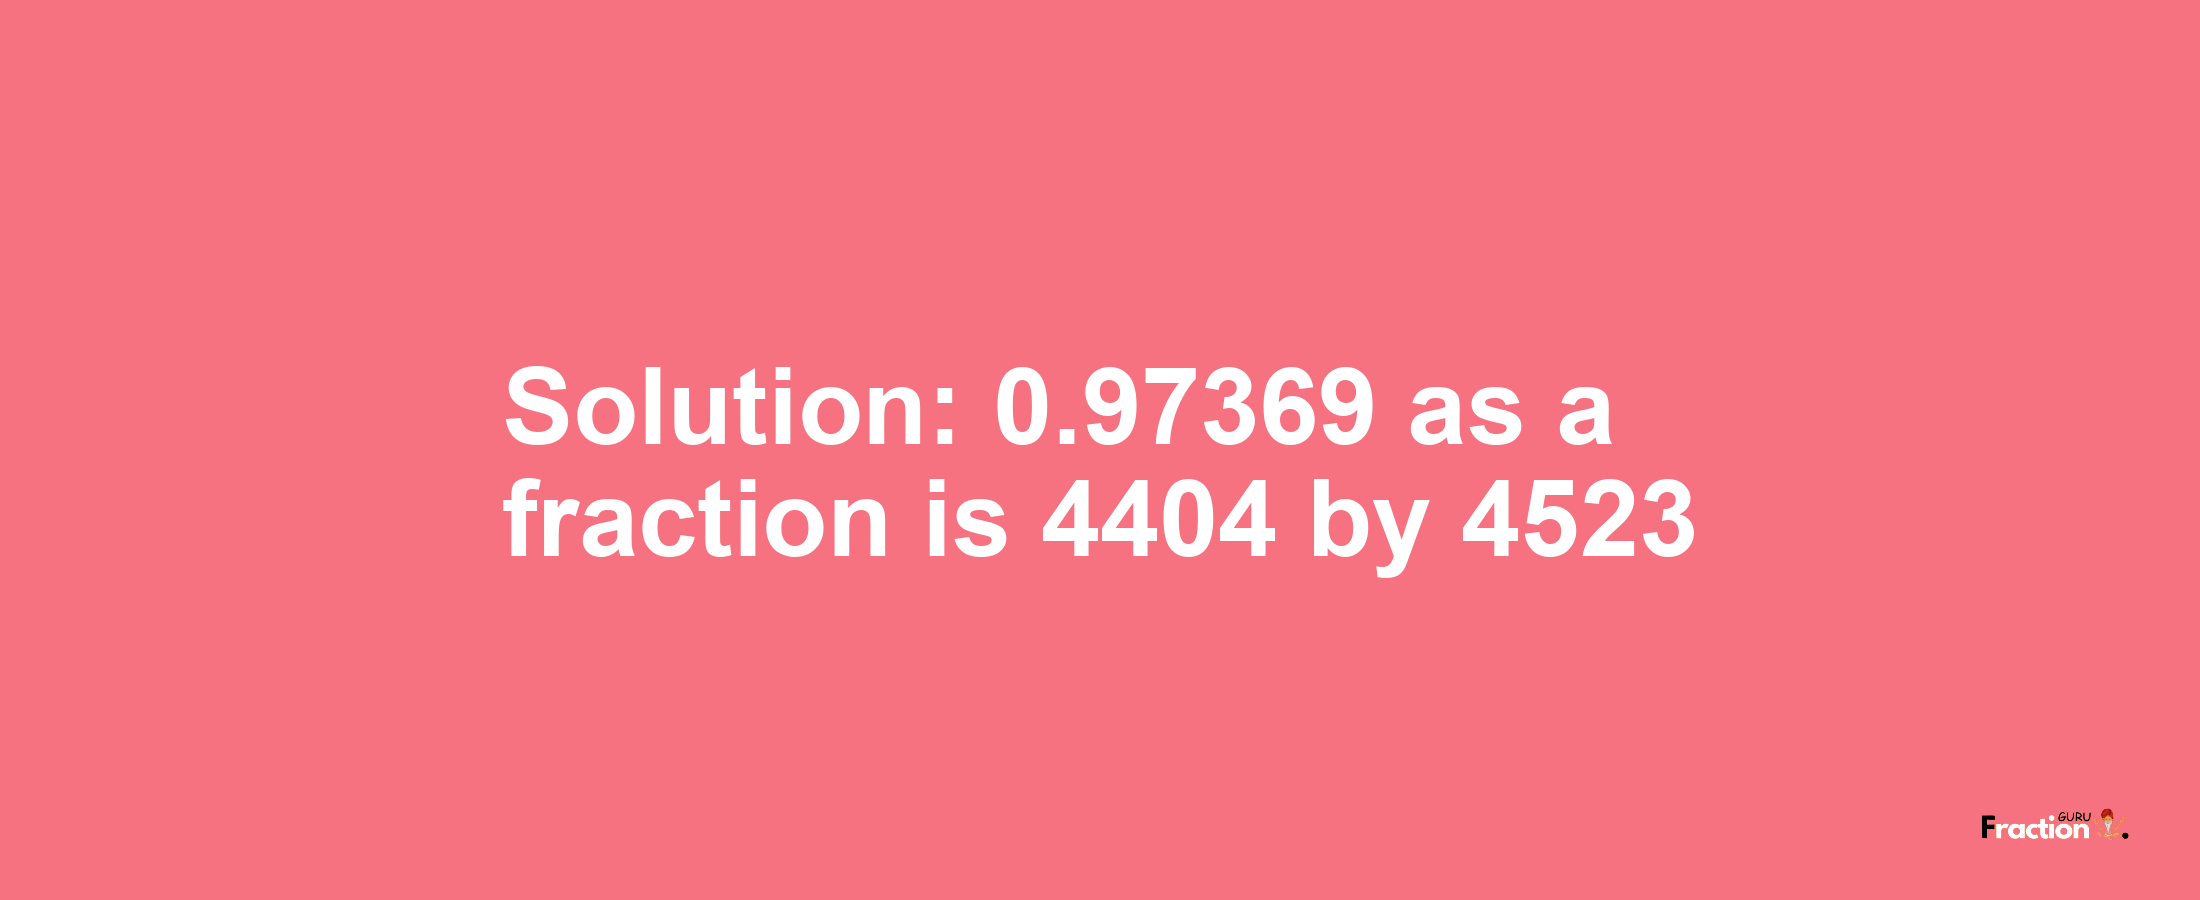 Solution:0.97369 as a fraction is 4404/4523